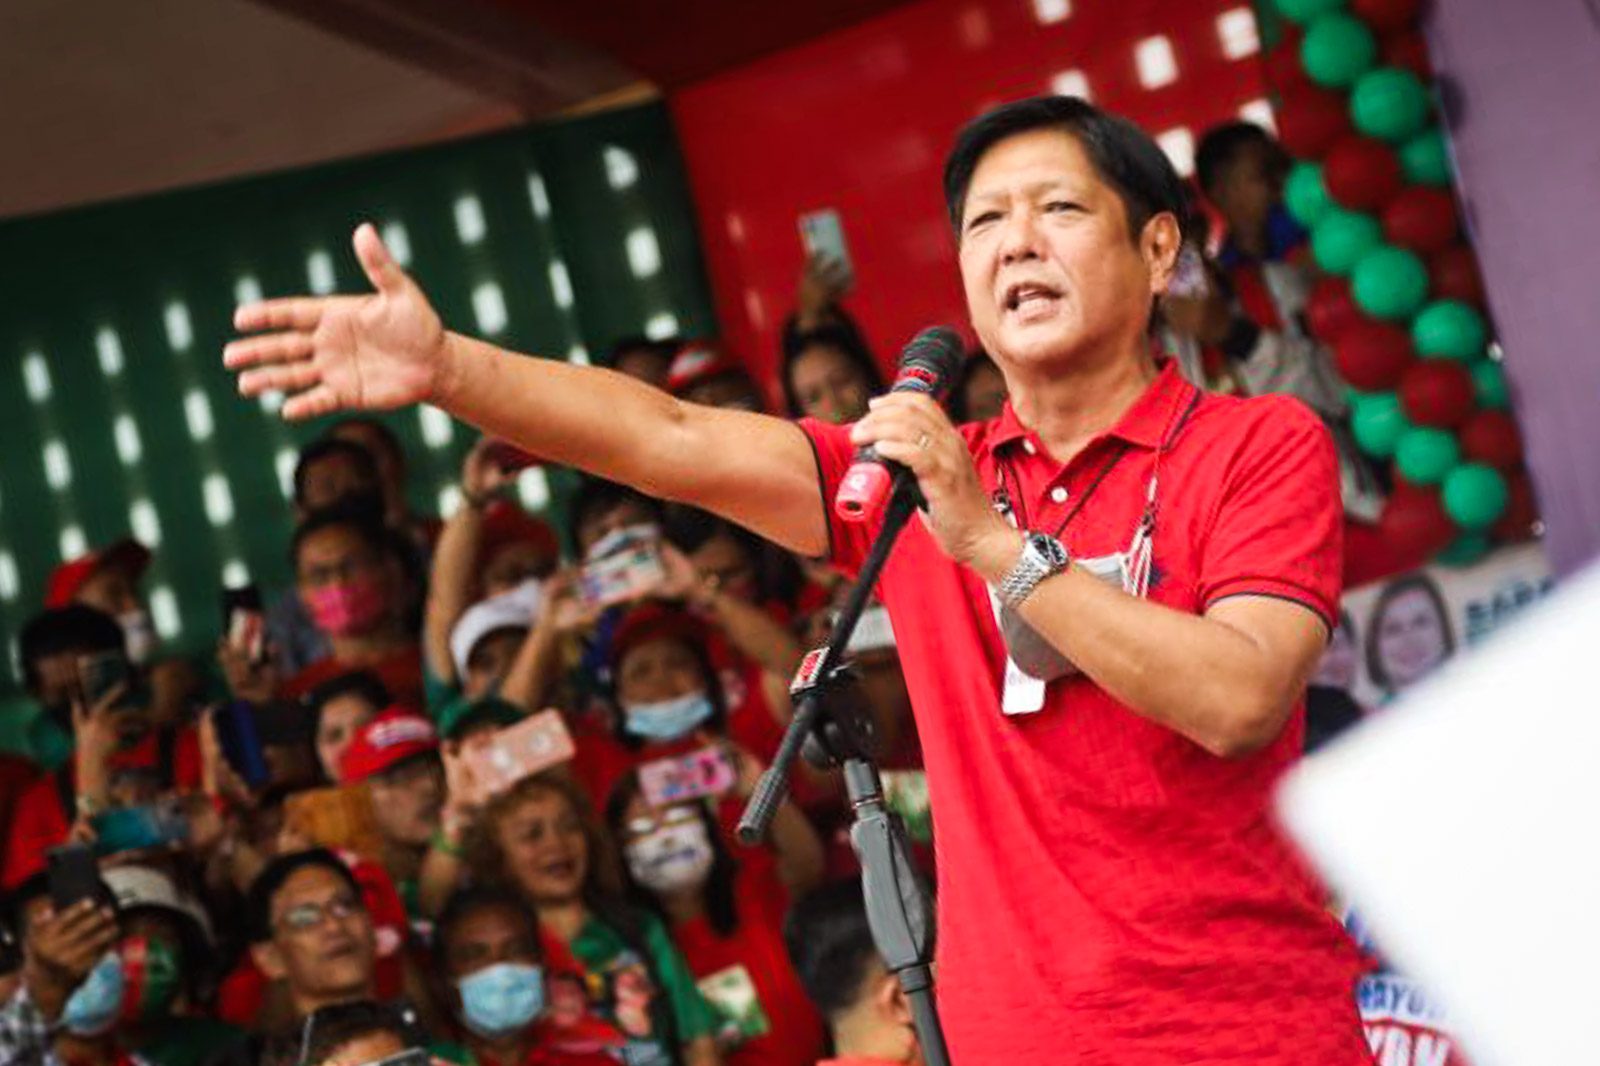 To consolidate, Marcos targets vote-rich Luzon, then Cebu for ‘sway’ region